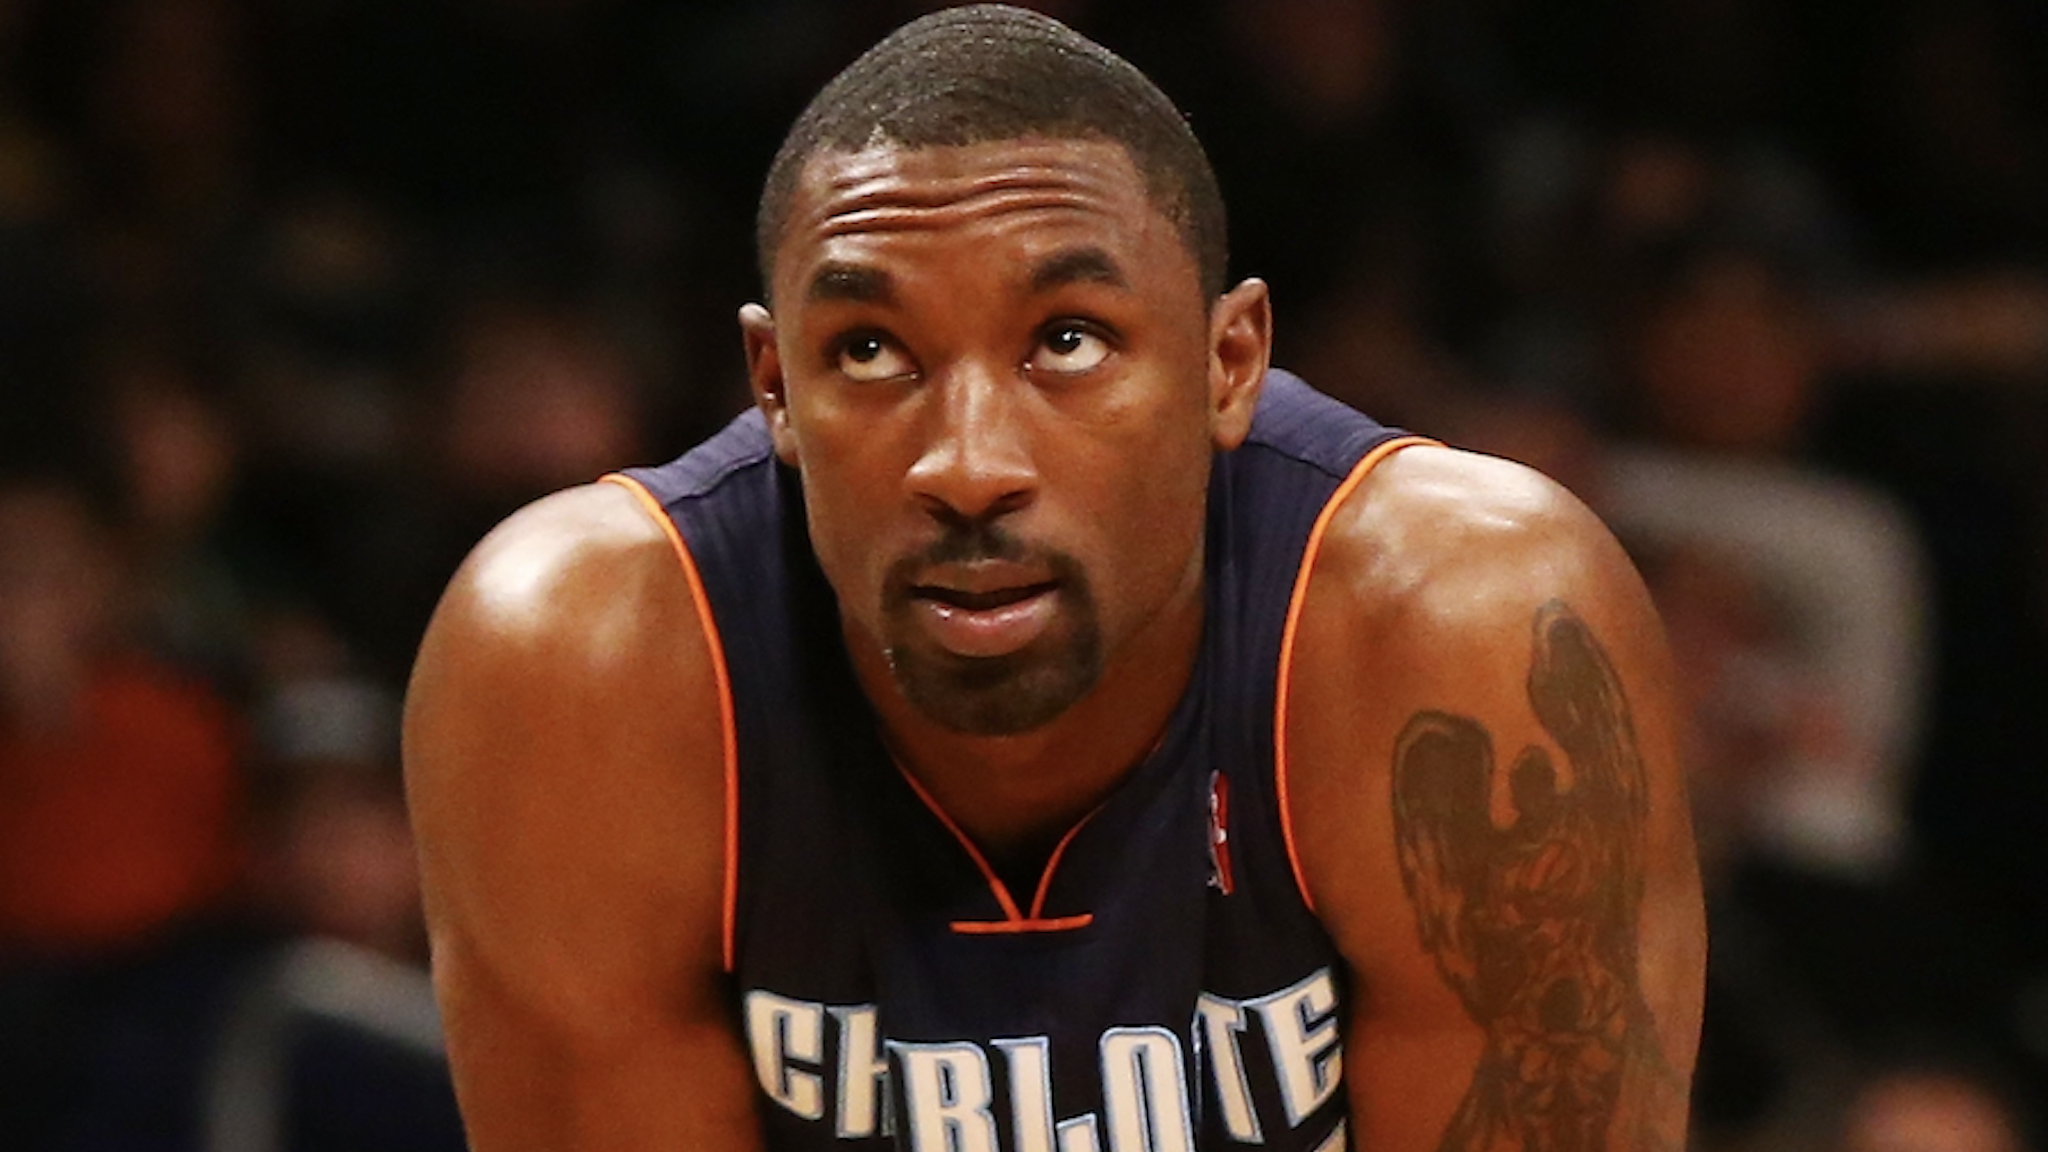 Ben Gordon, who played 11 seasons with four different teams before retiring in 2015, was arrested at LaGuardia International Airport Monday night